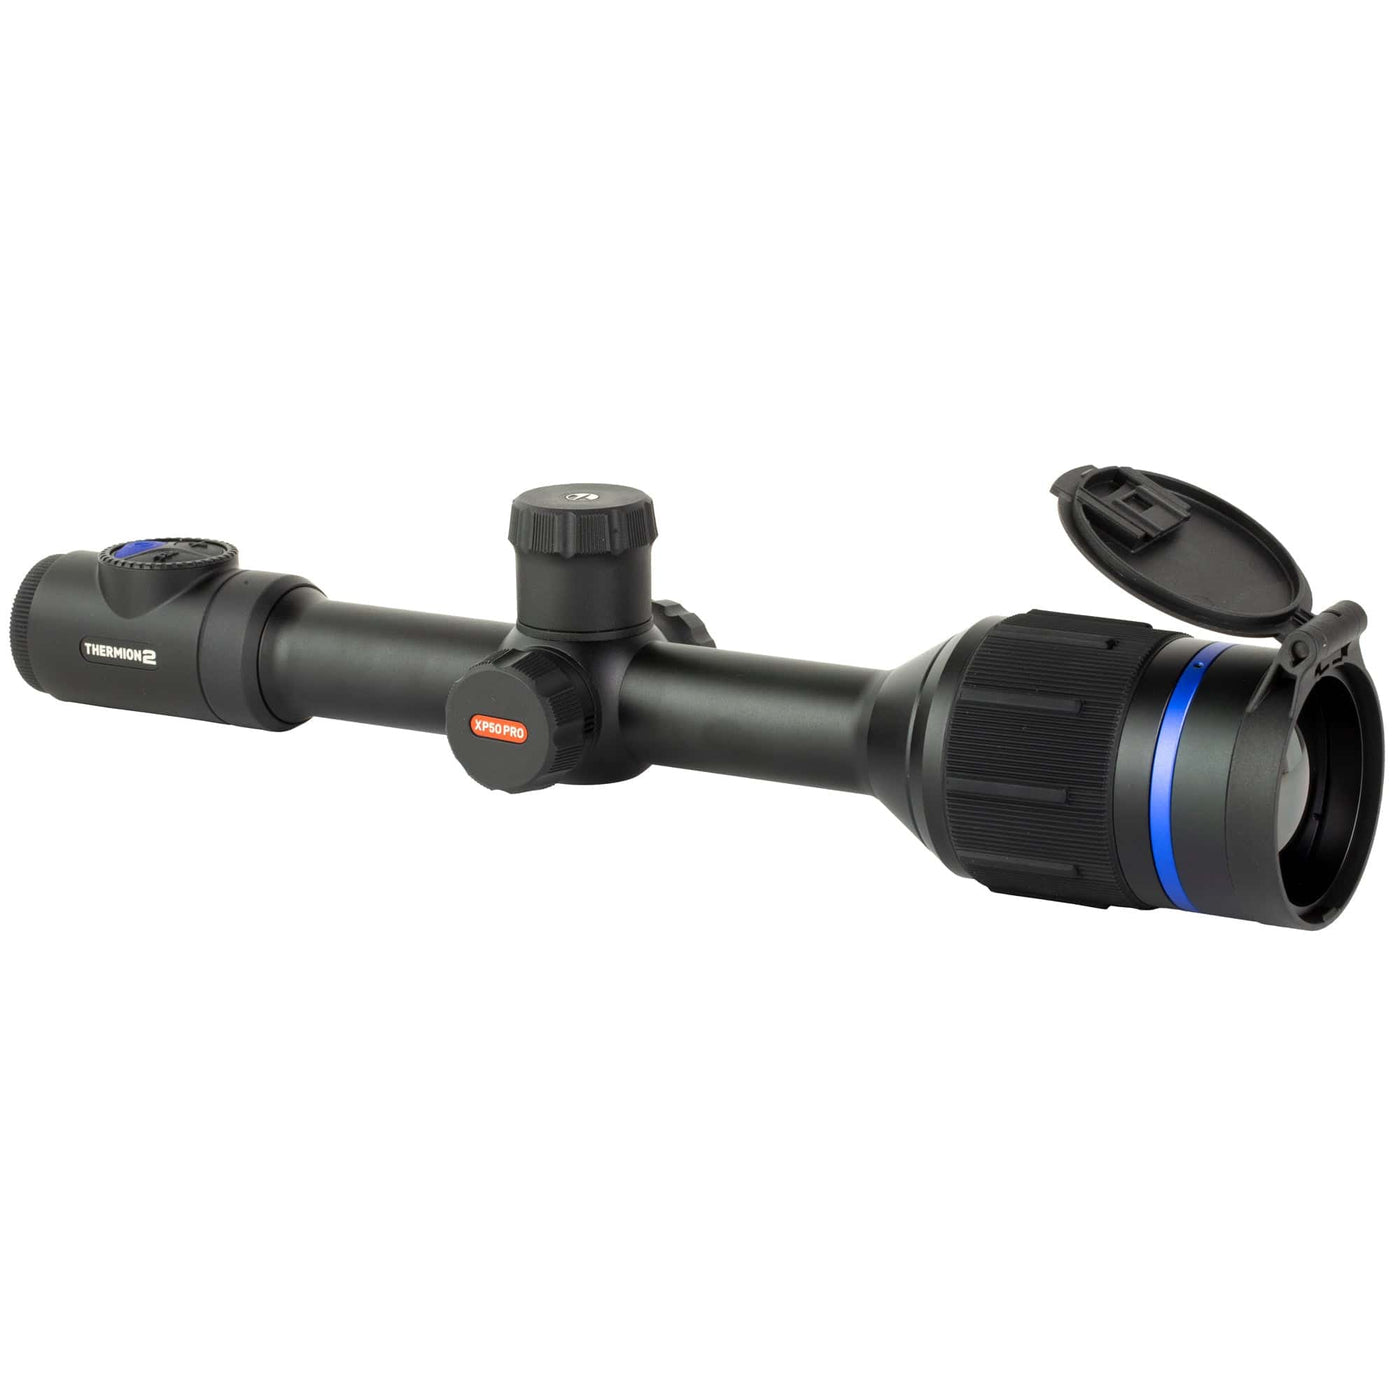 Pulsar Pulsar Thermion 2 XP50 Pro Thermal Riflescope Nightvision And Thermal